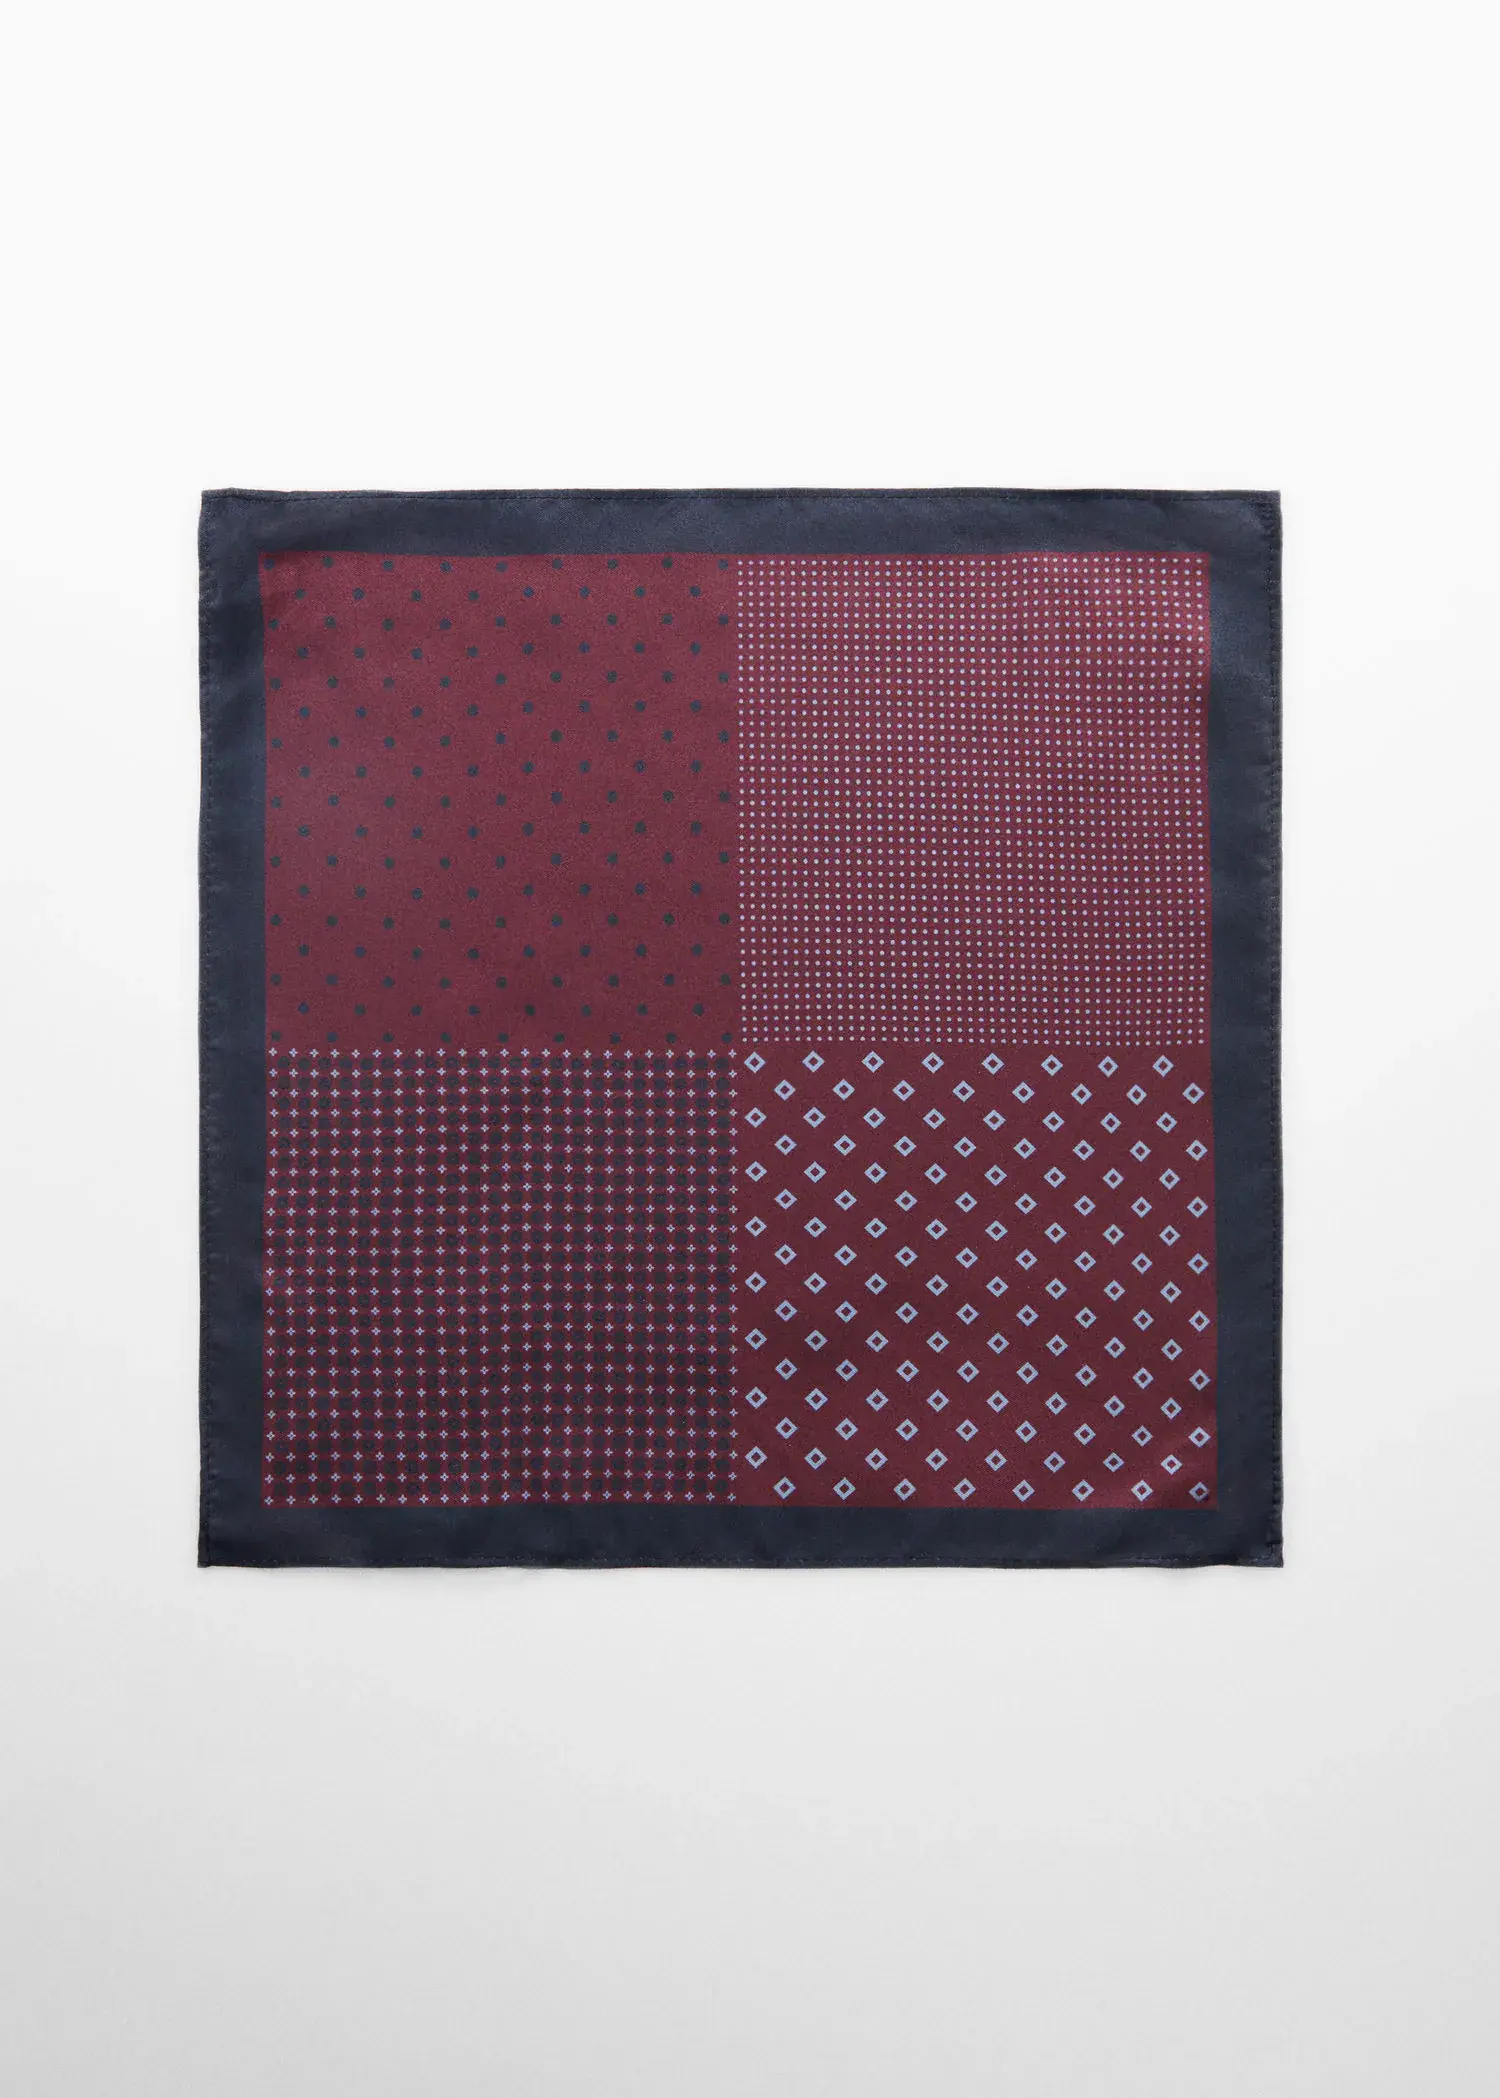 Mango Printed pocket square. a red and black patterned pocket square. 